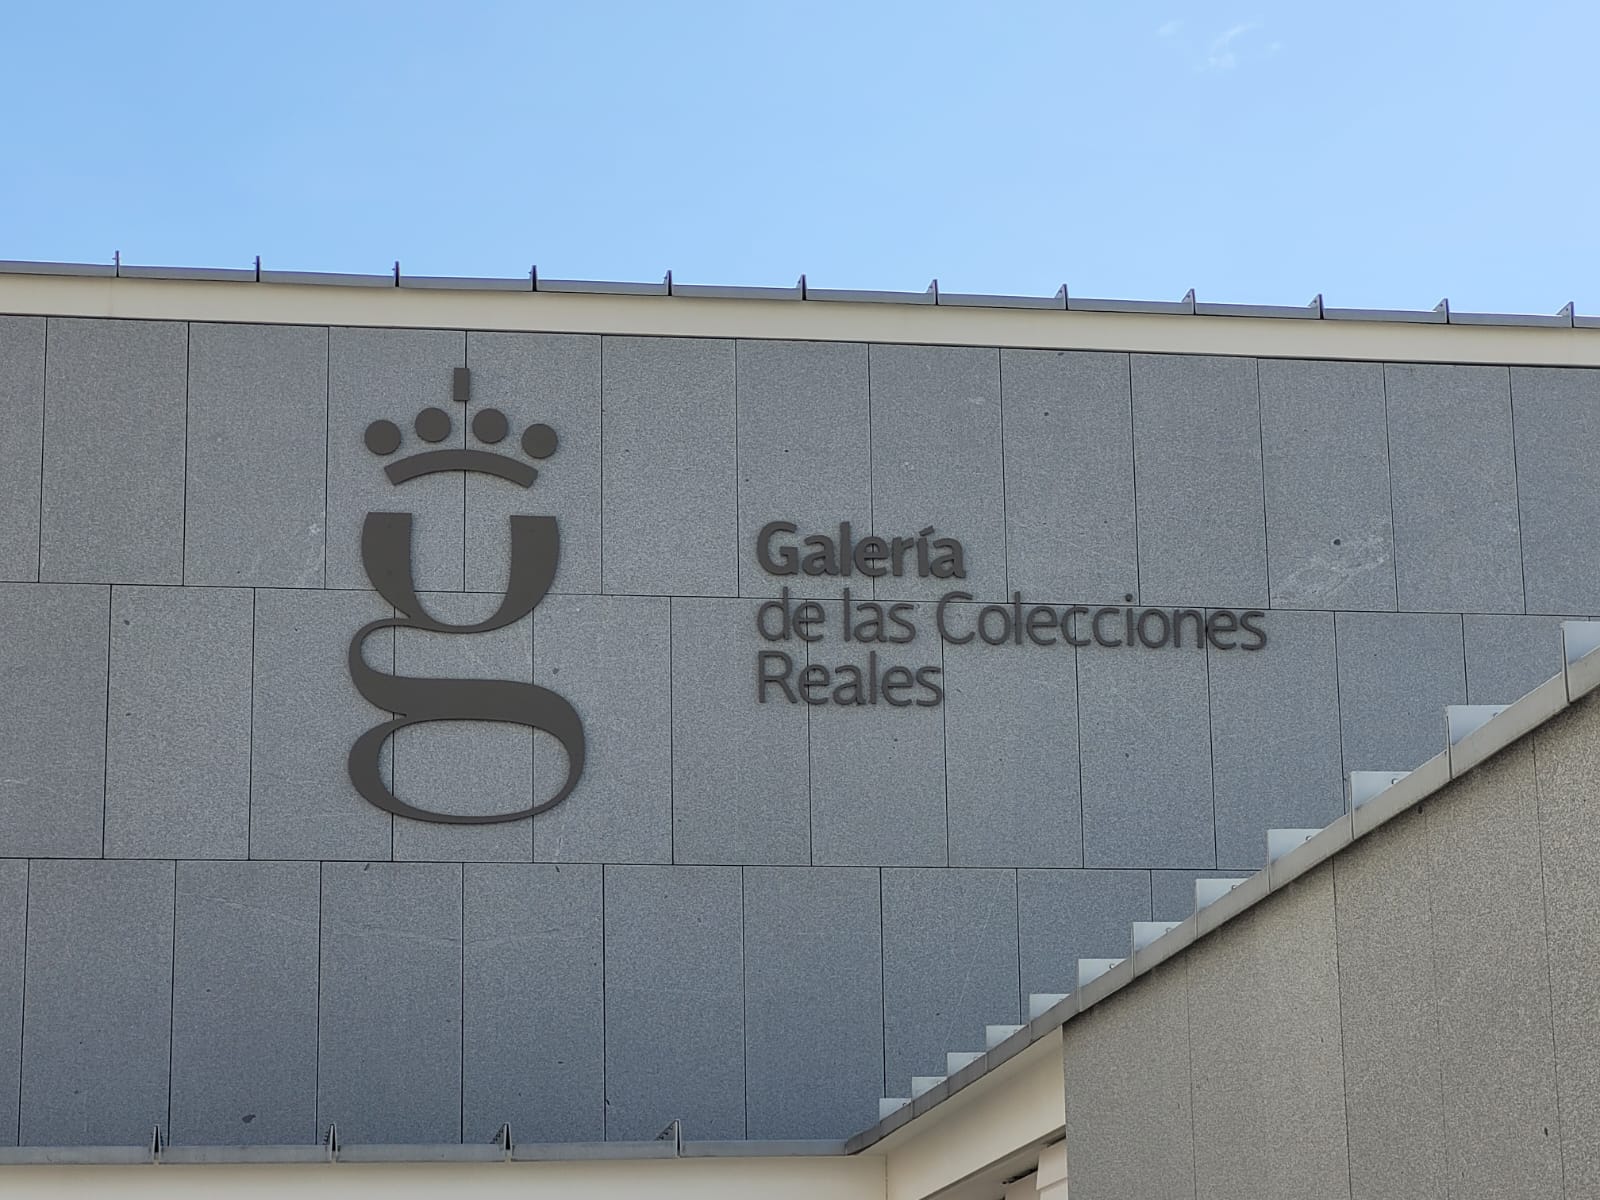 The Gallery of Royal Collections